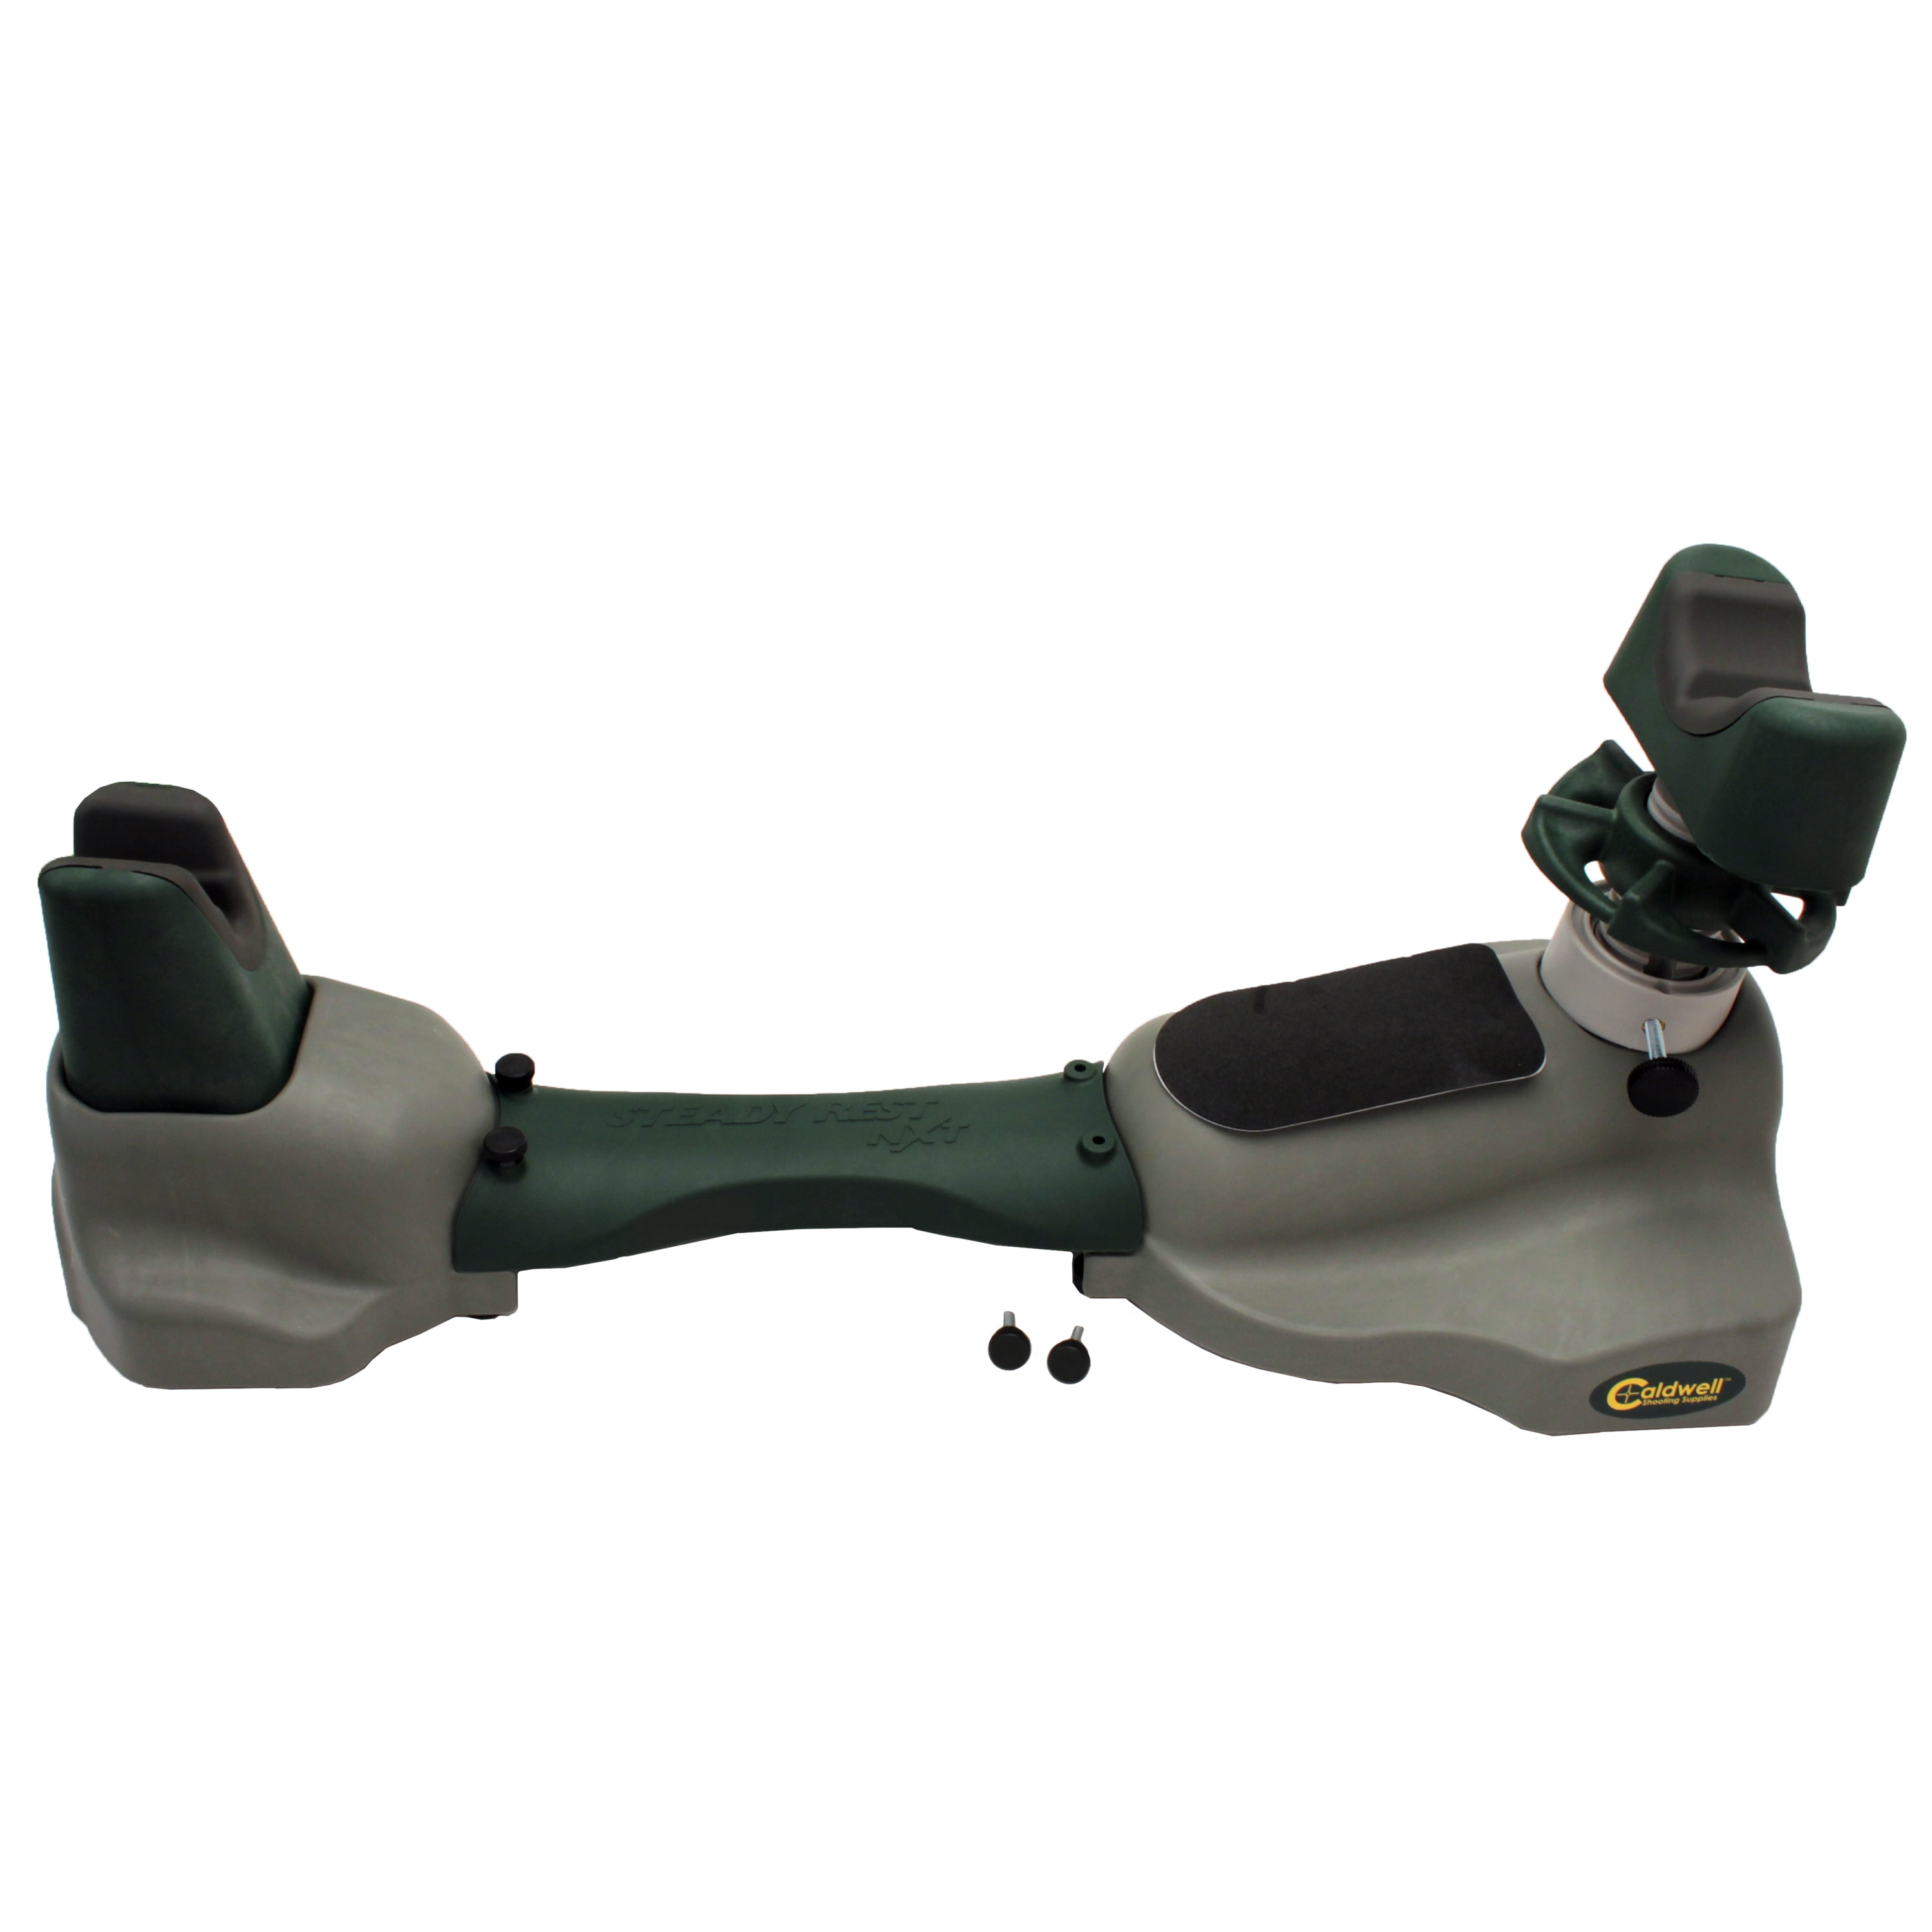 Caldwell Steady NXT Rifle Pistol Adjustable Outdoor Shooting Rest Bench Cradle 